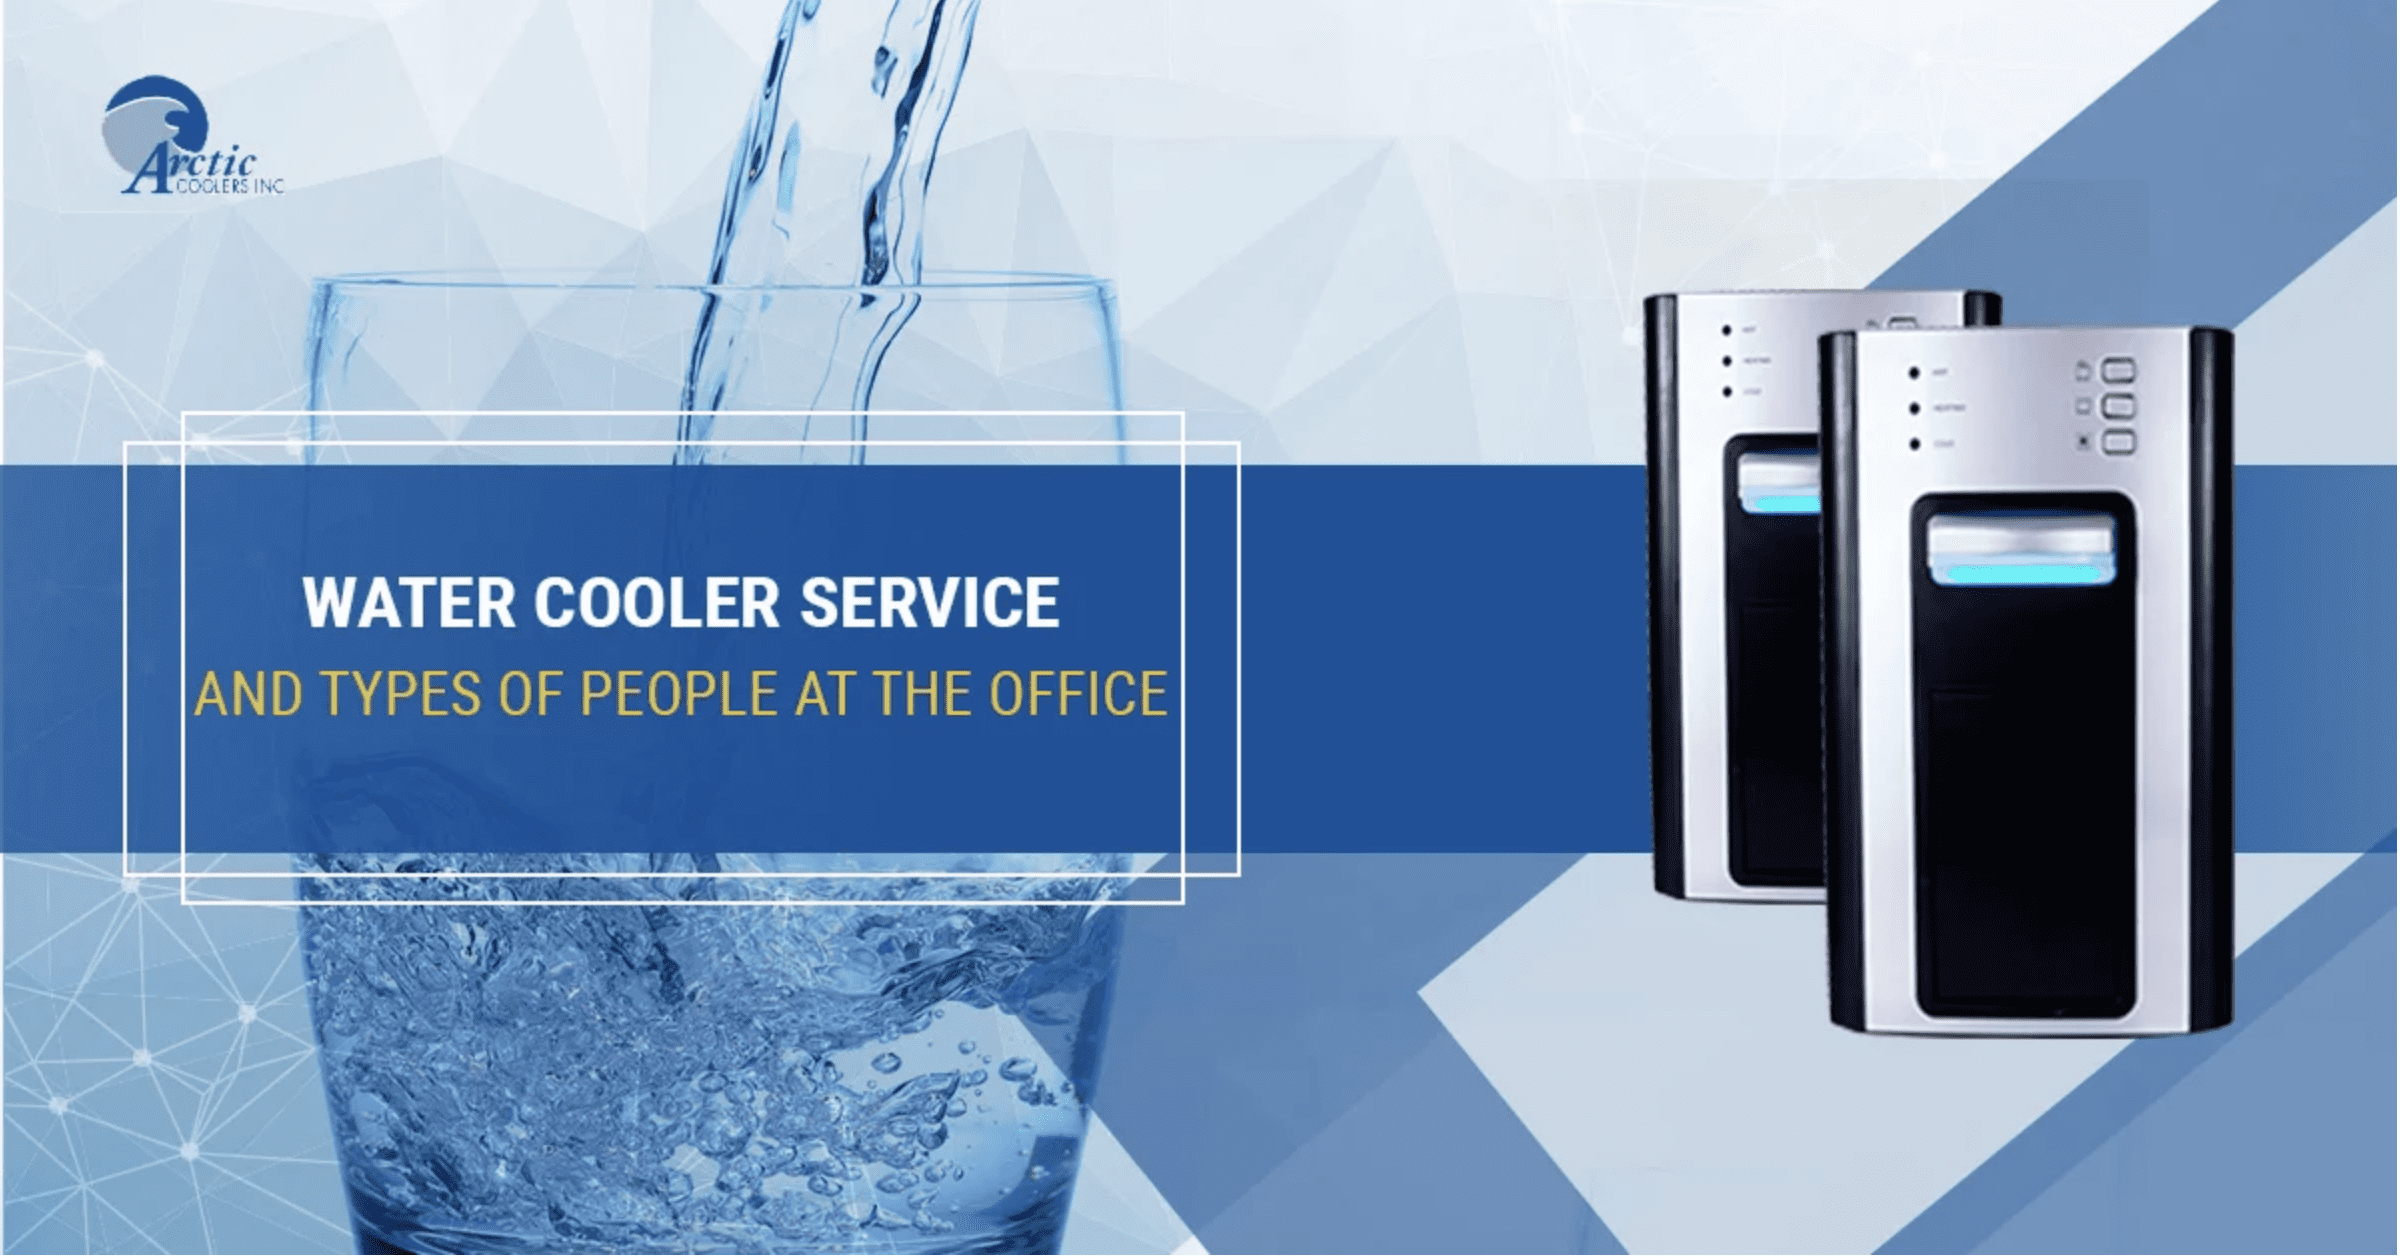 Water cooler service and types of people at the office